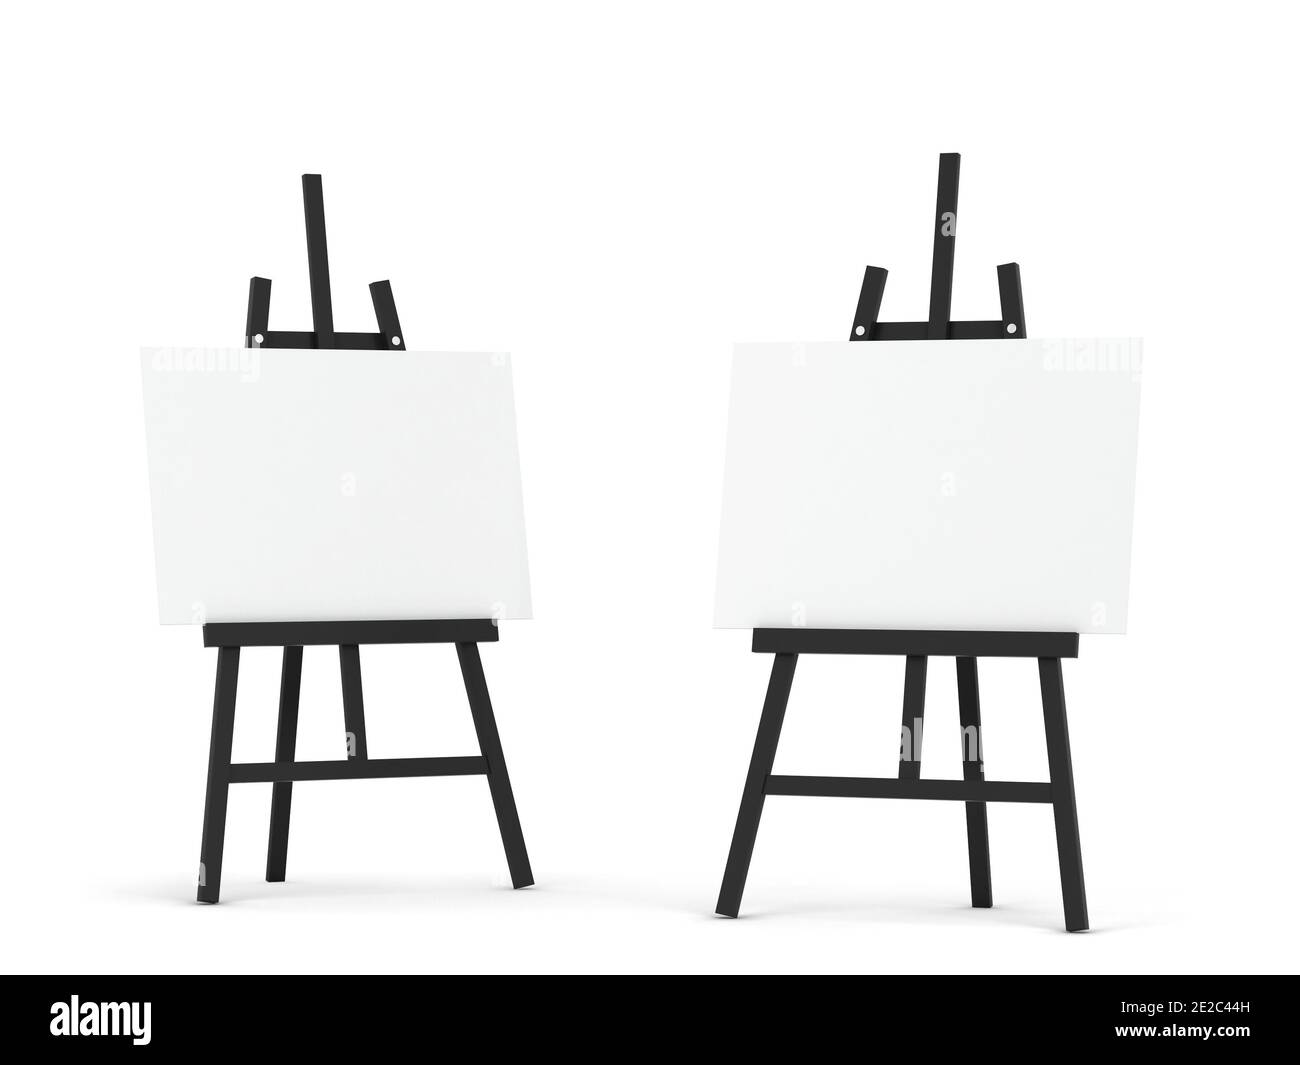 Sodial White Board Artist Telescopic Field Studio Painting Easel Tripod Display Stand, Black